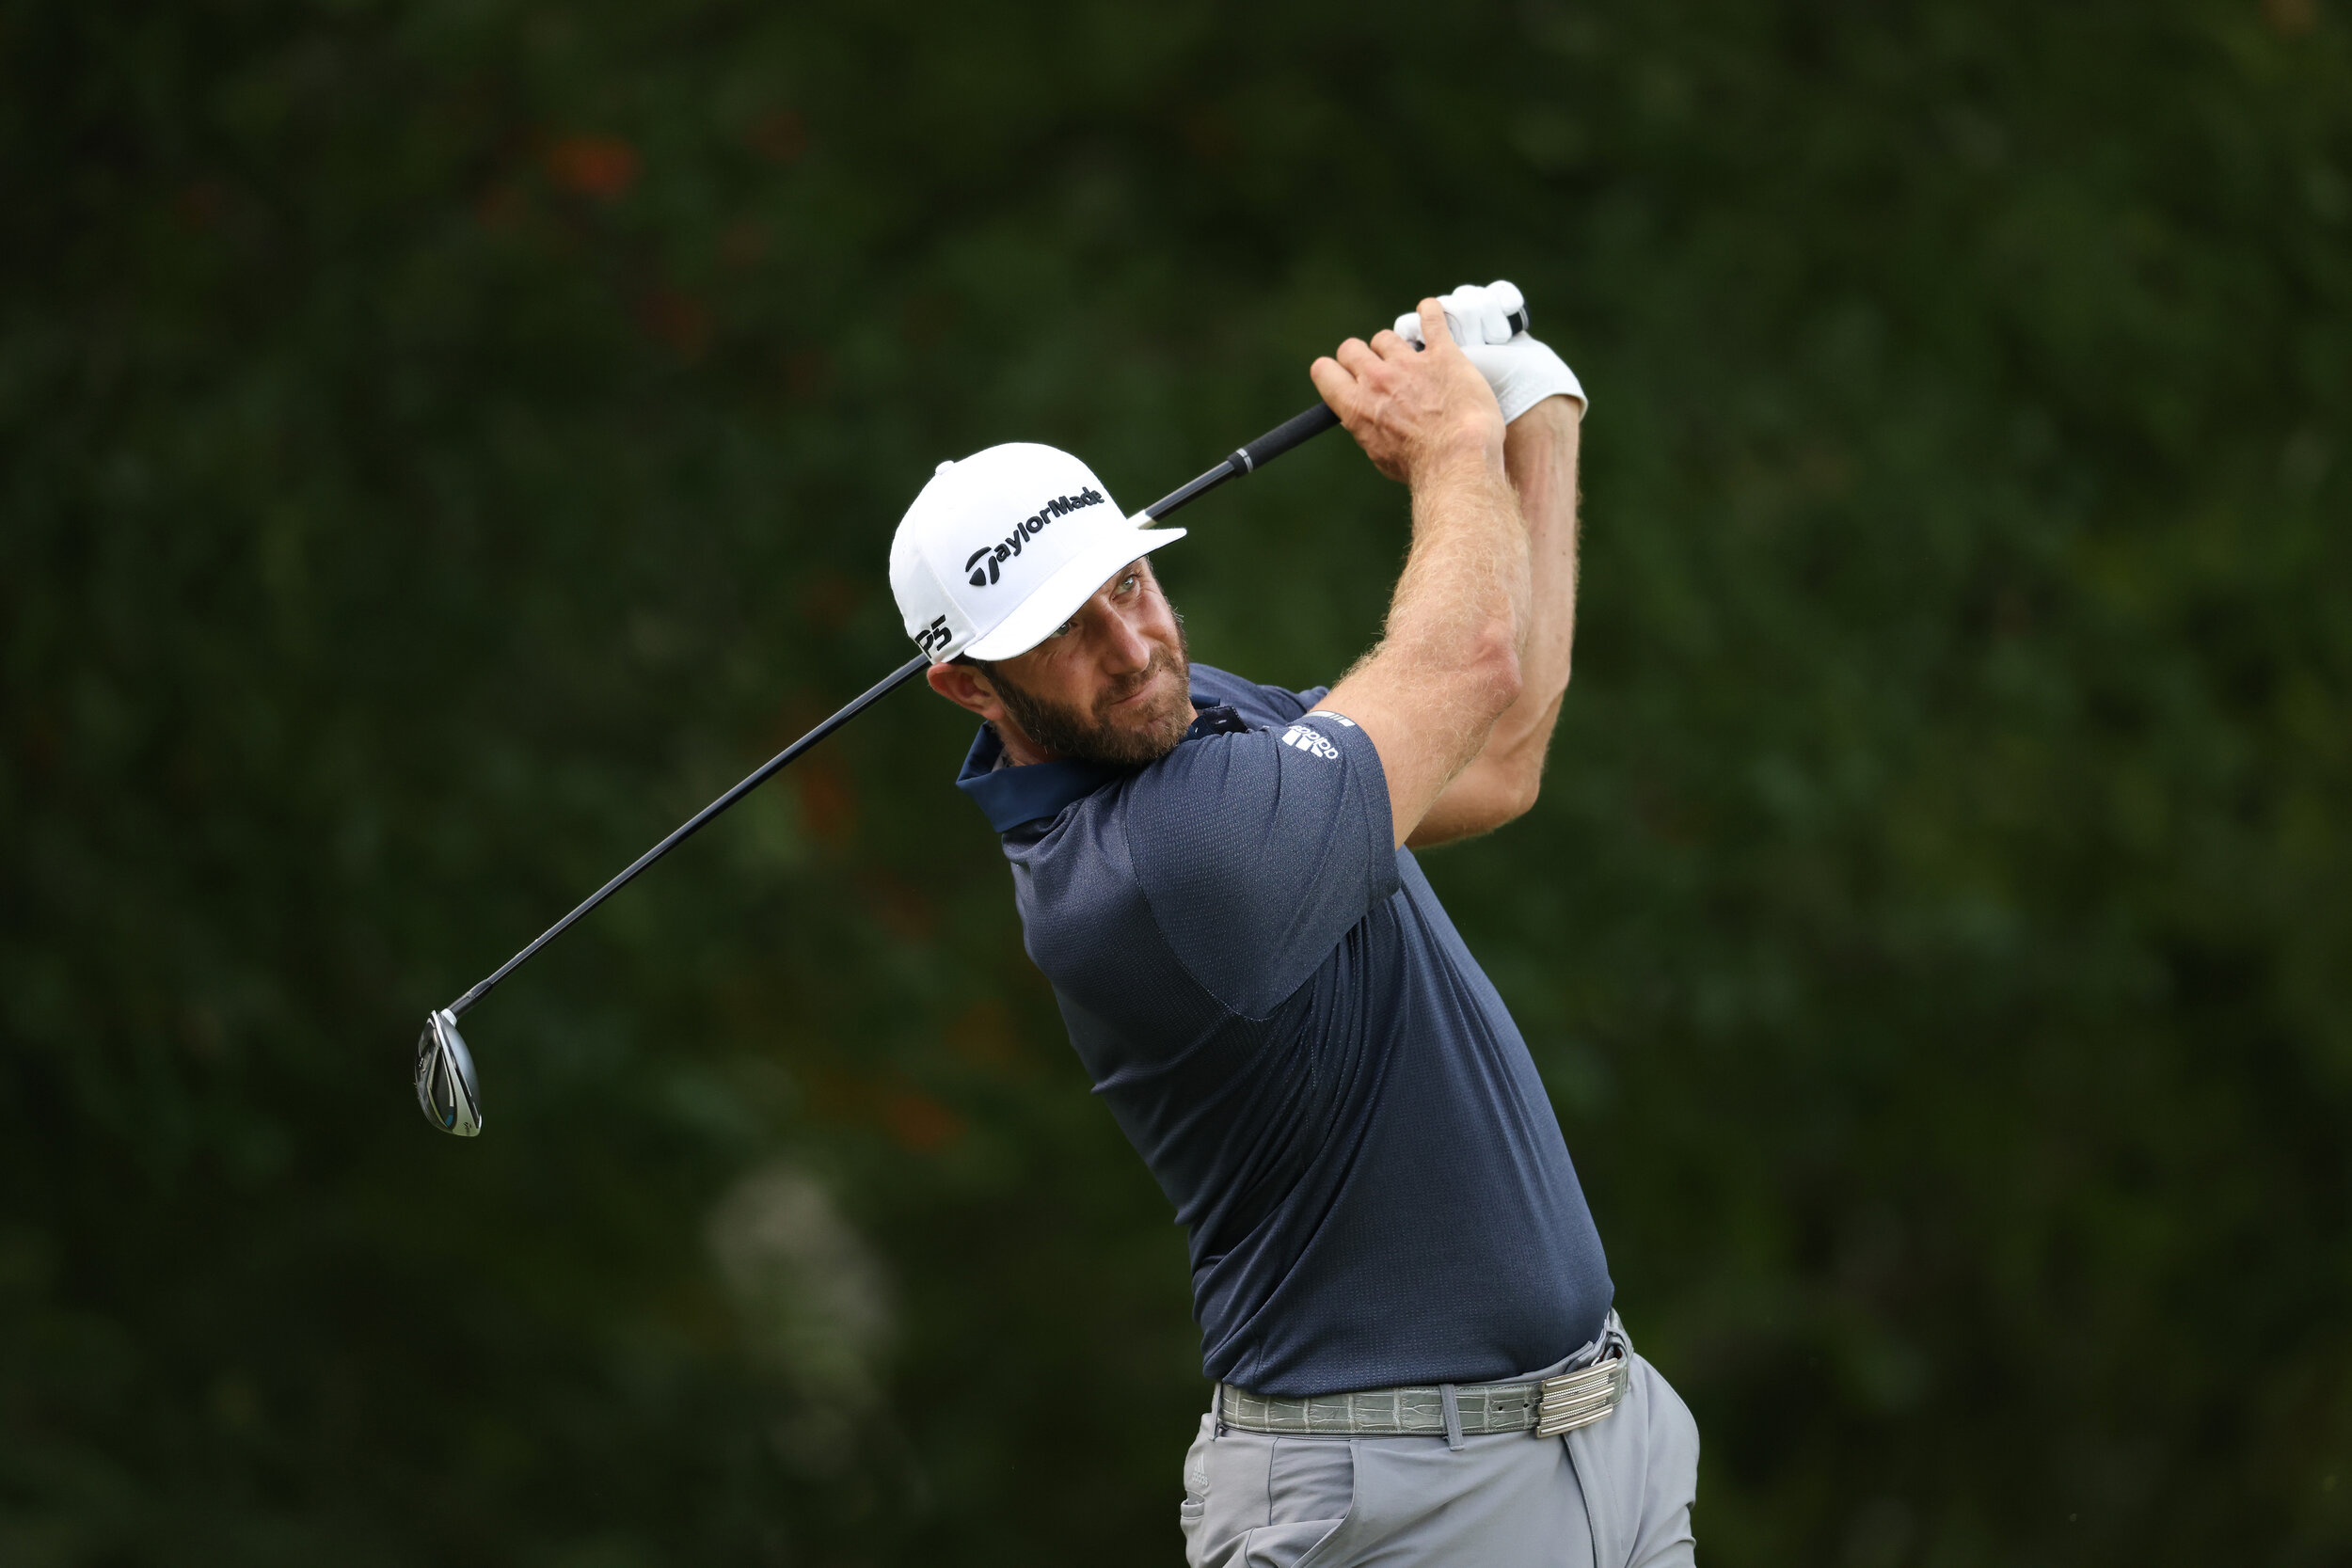  NORTON, MASSACHUSETTS - AUGUST 22: Dustin Johnson of the United States plays his shot on the fourth tee during the third round of The Northern Trust at TPC Boston on August 22, 2020 in Norton, Massachusetts. (Photo by Rob Carr/Getty Images) 